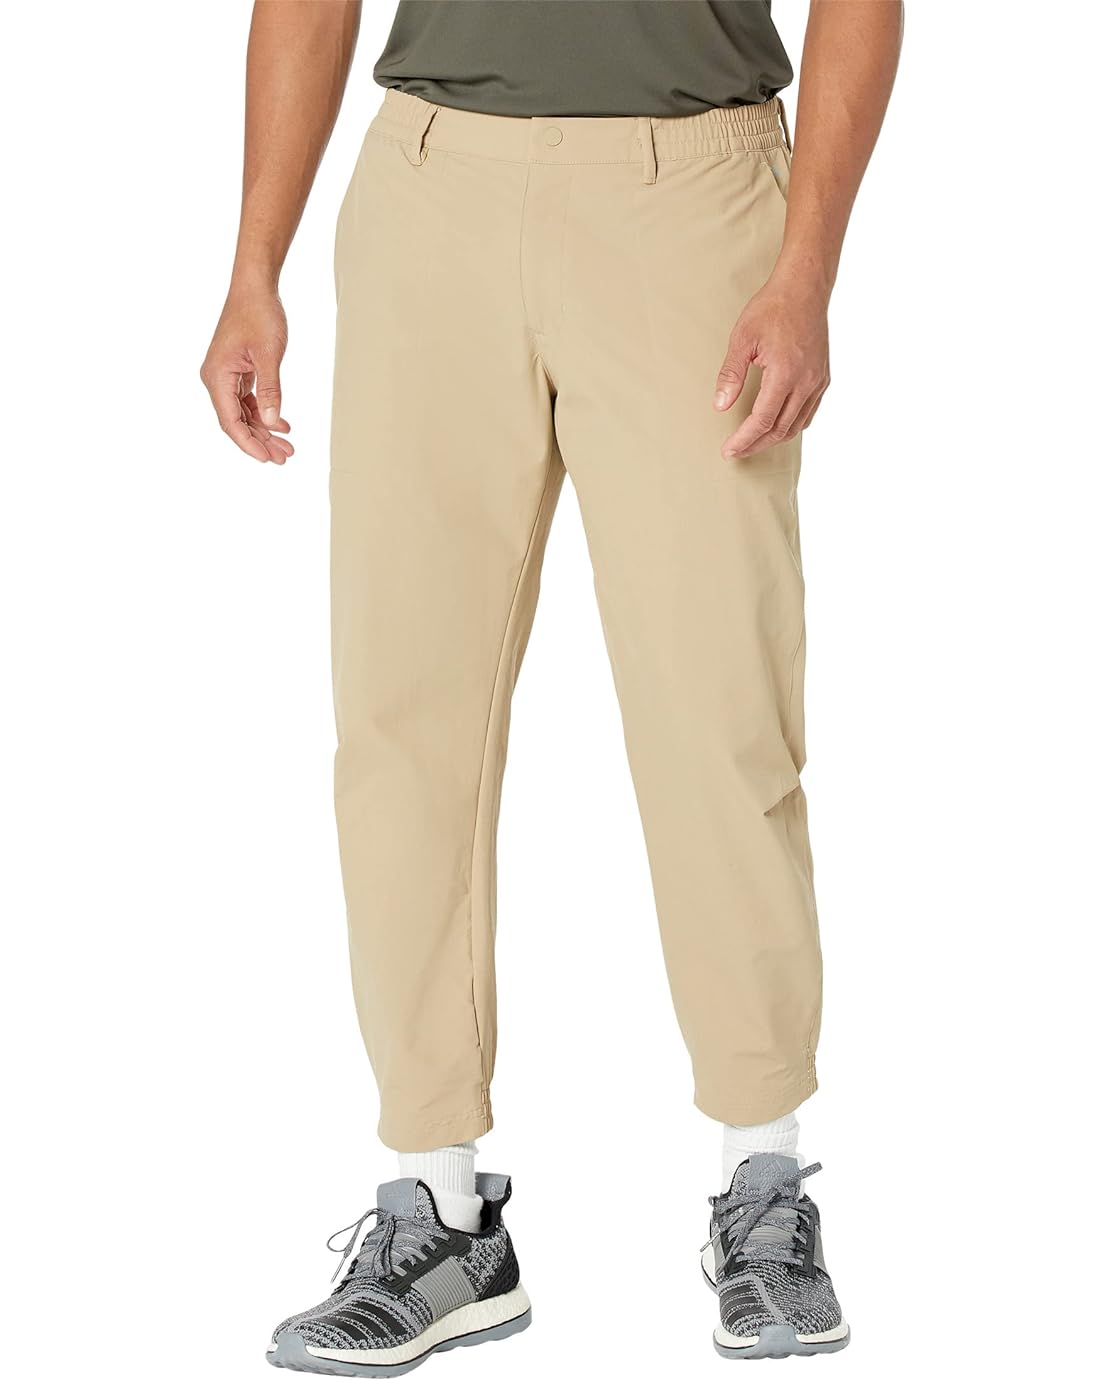 adidas Golf Go-To Commuter Pants